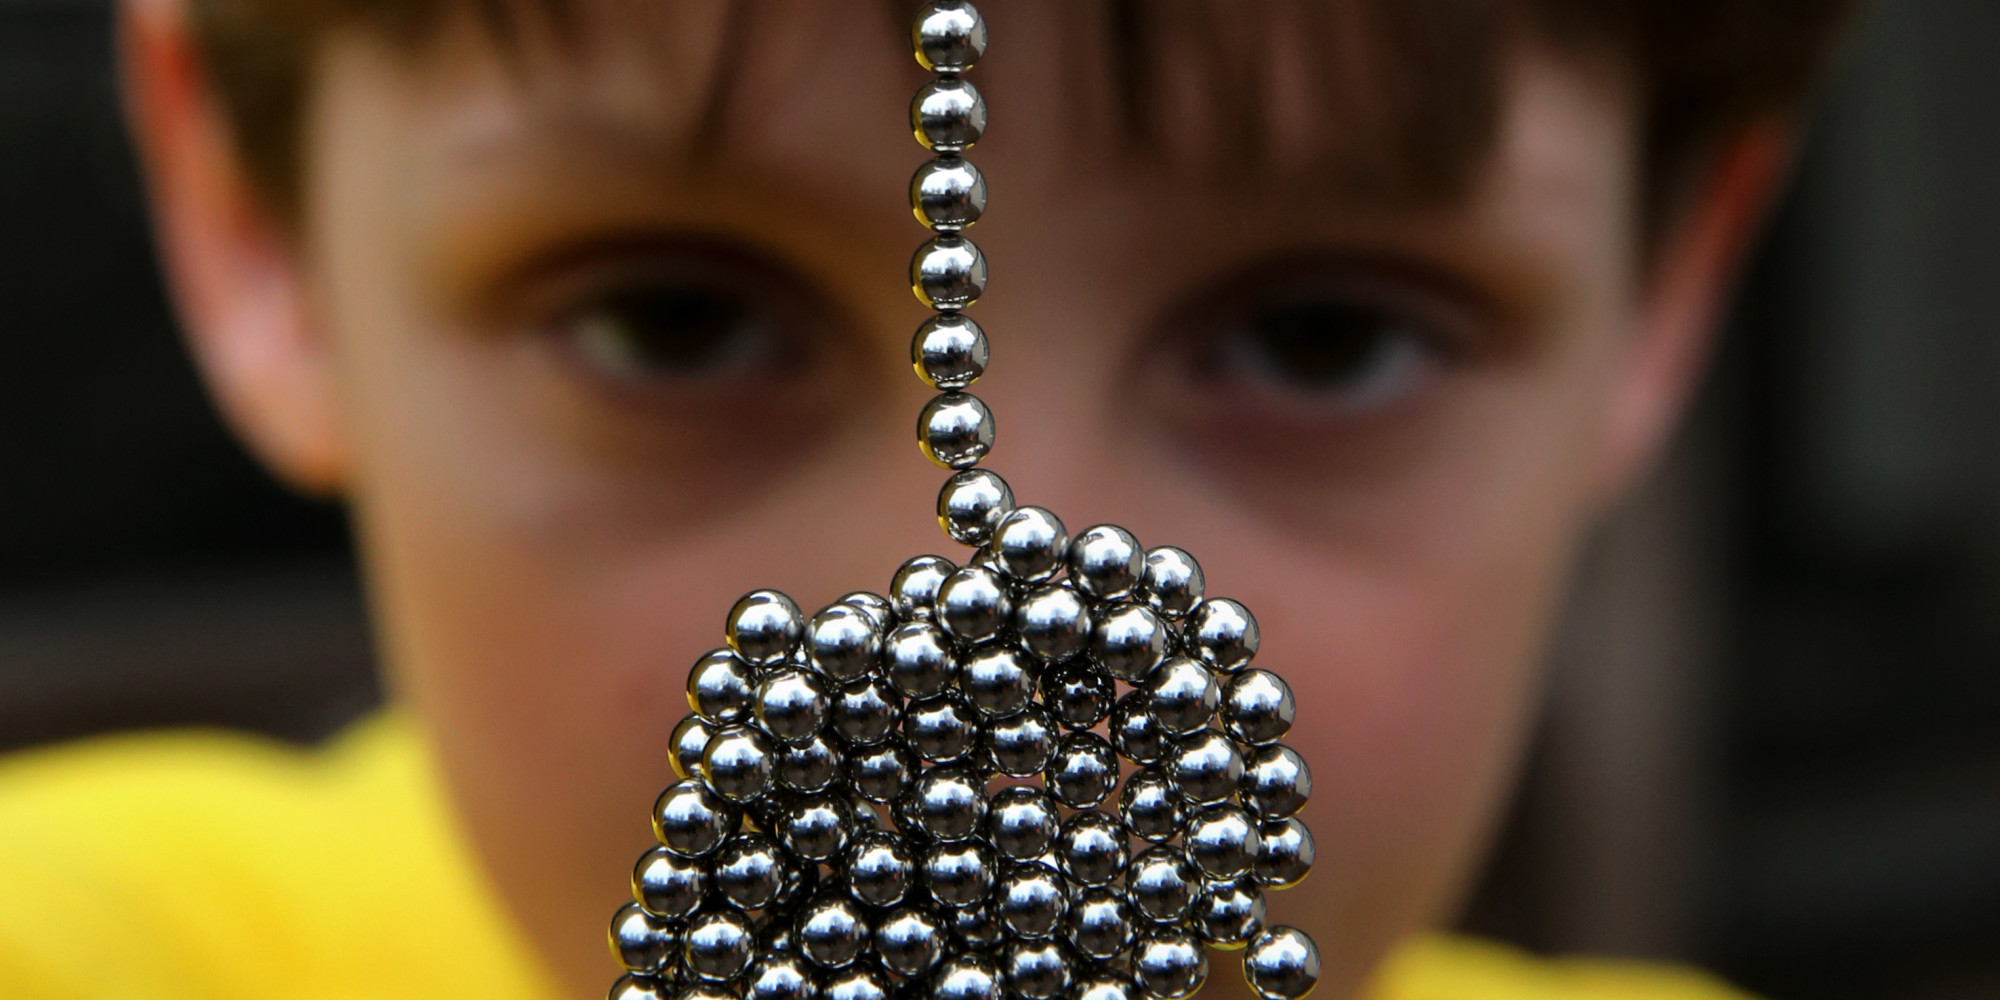 small magnetic balls toy